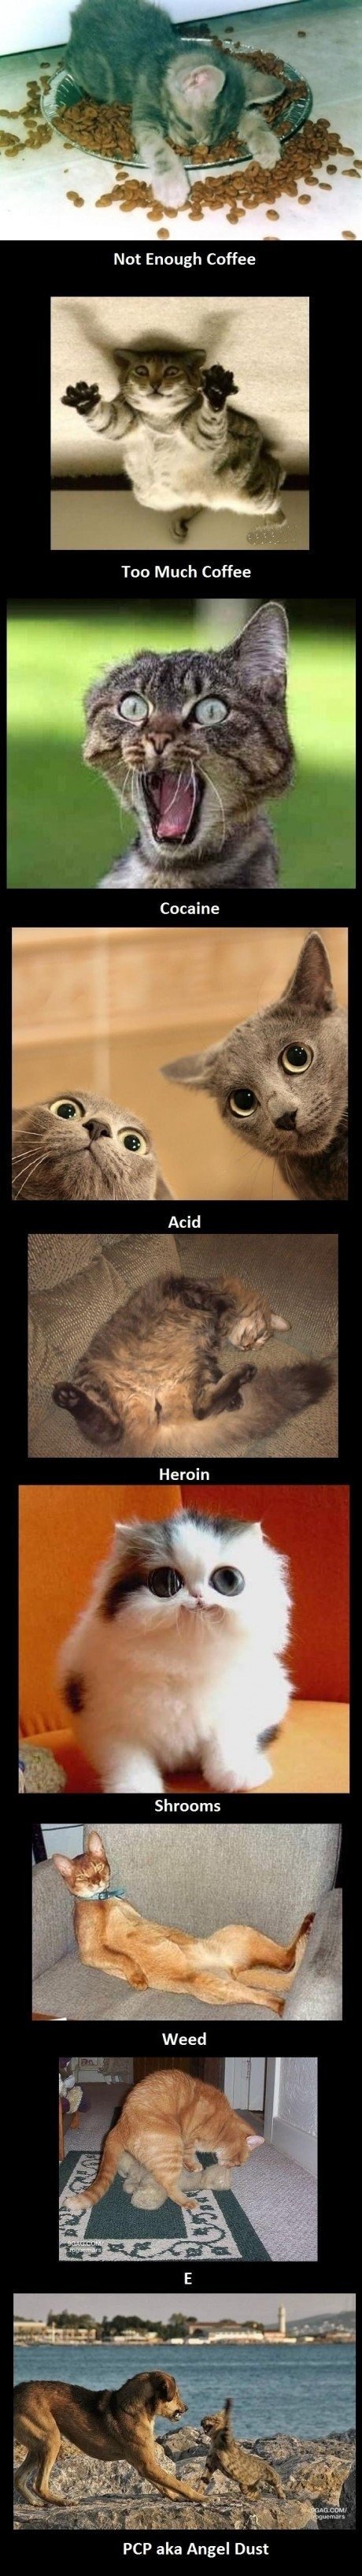 cats on drugs.